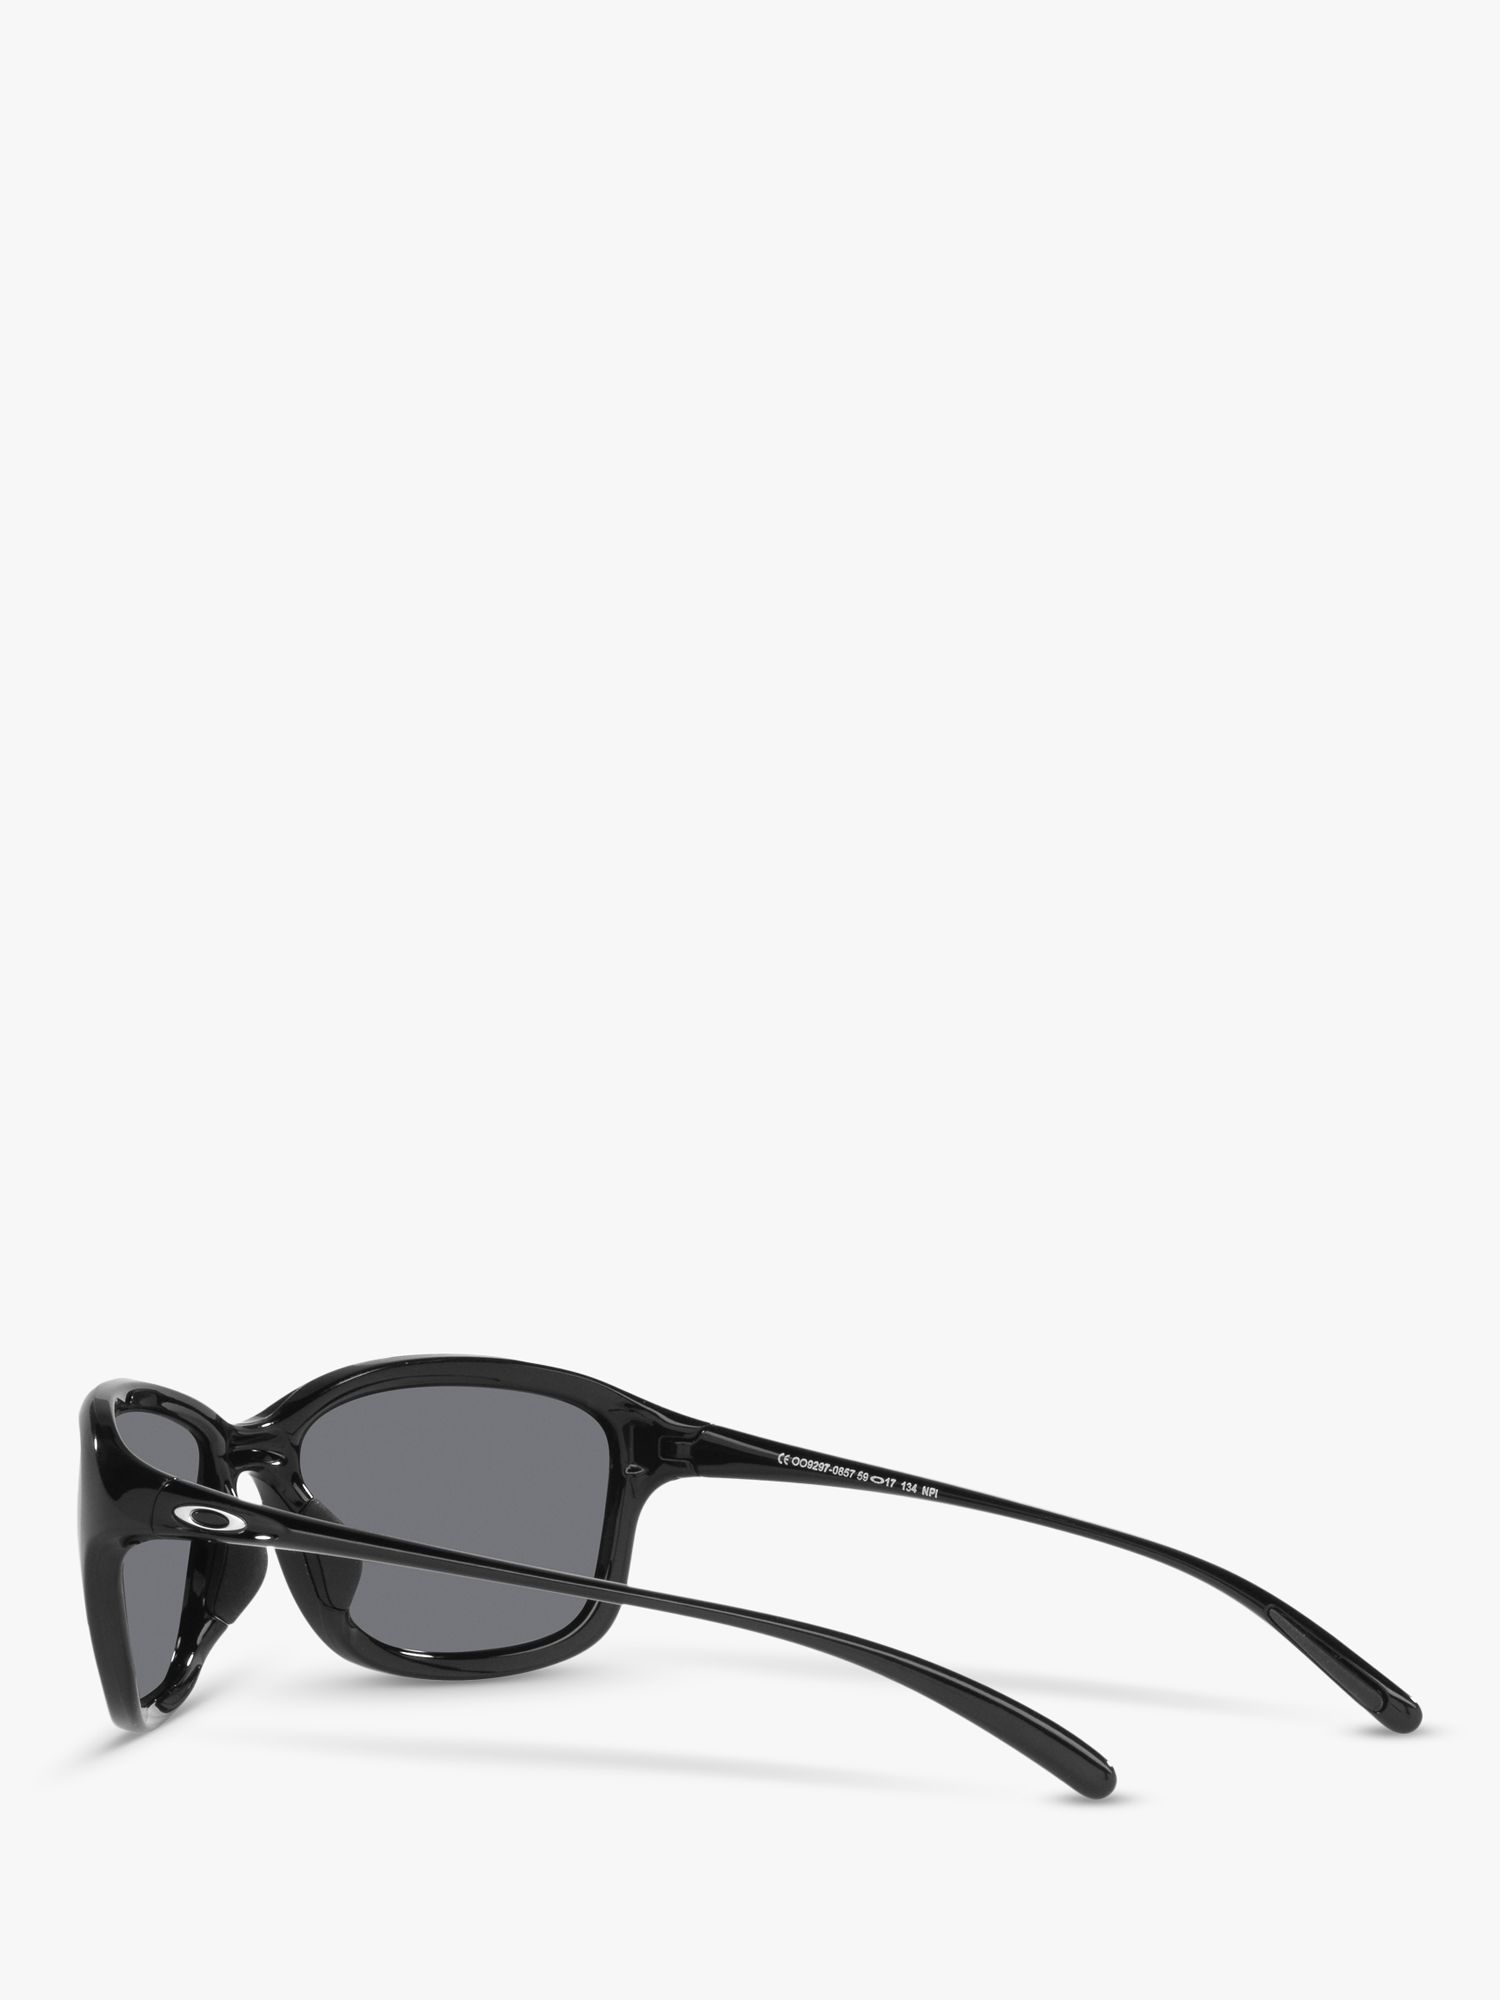 Buy Oakley OO9297 Women's She's Unstoppable Polarised Oval Sunglasses Online at johnlewis.com